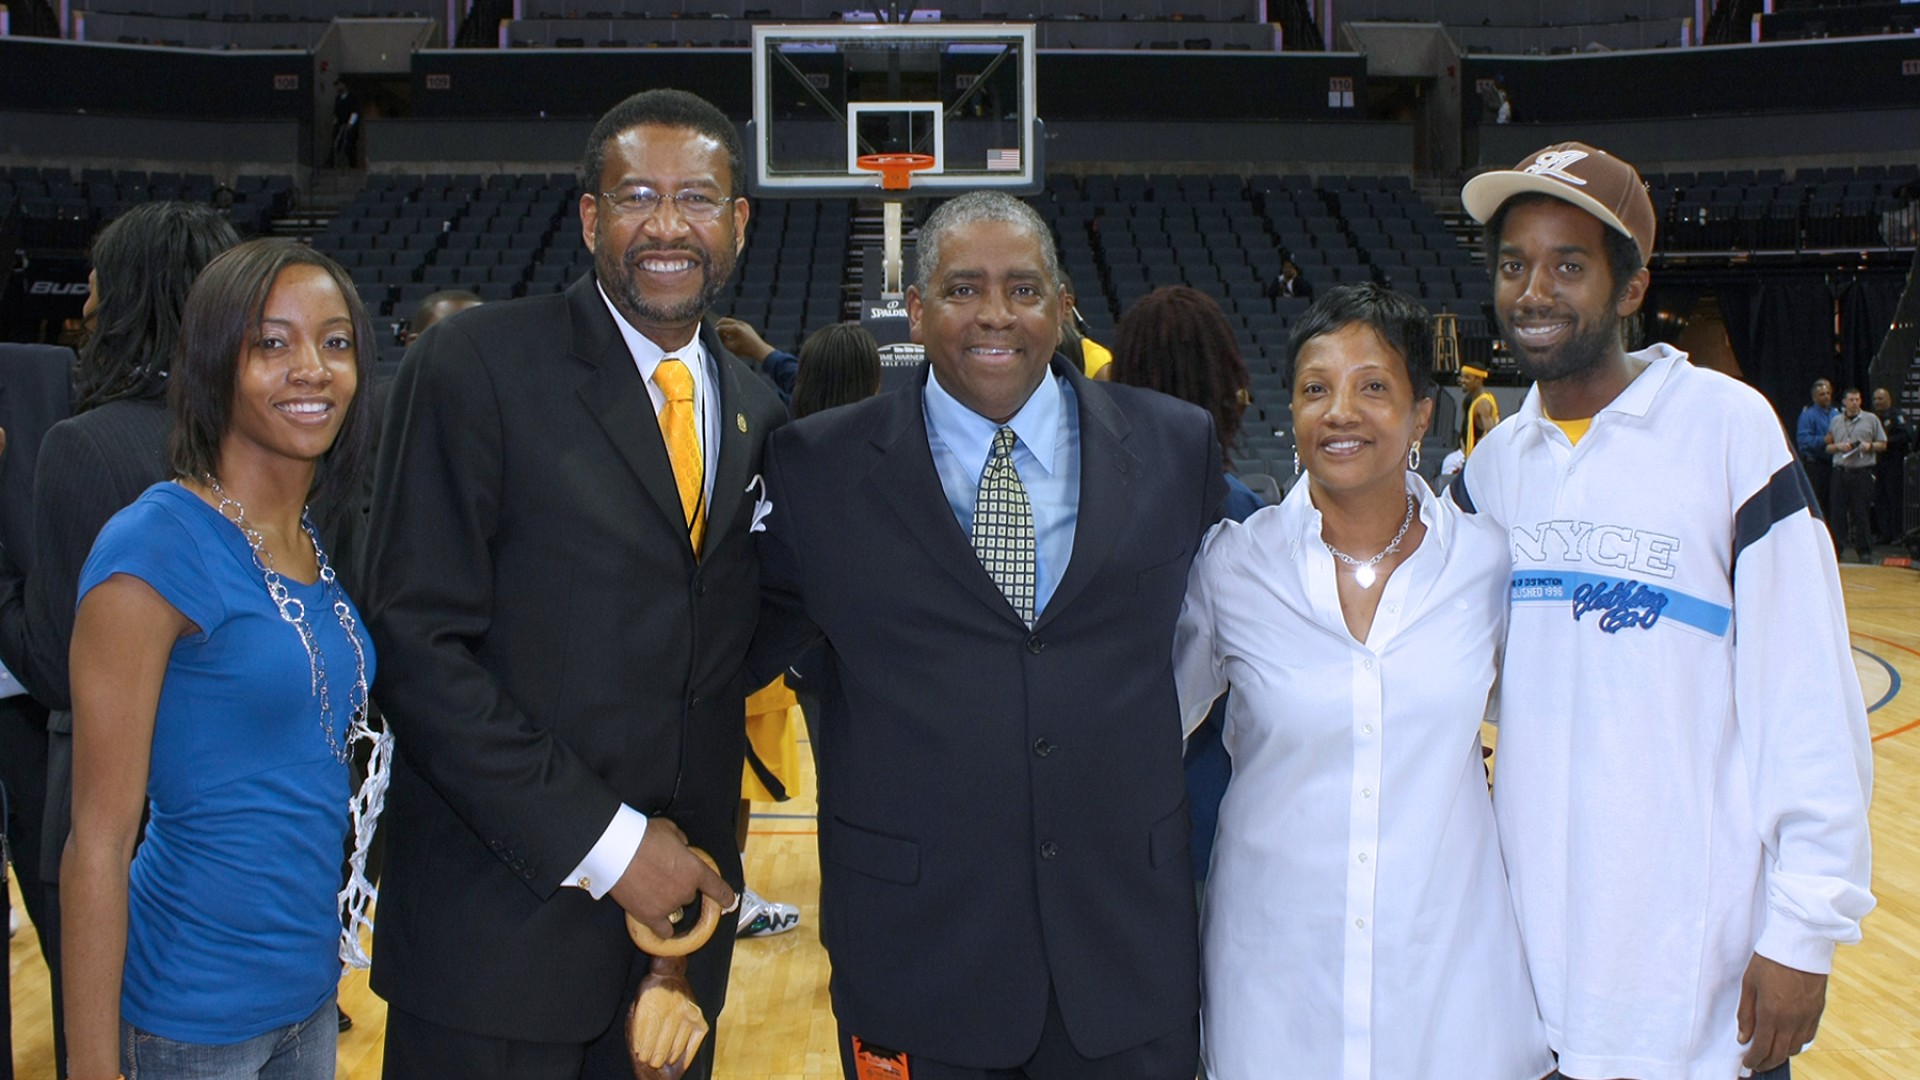 Steve Joyner Sr. with his wife and President Ronald L. Carter at after the CIAA Championship in 2008